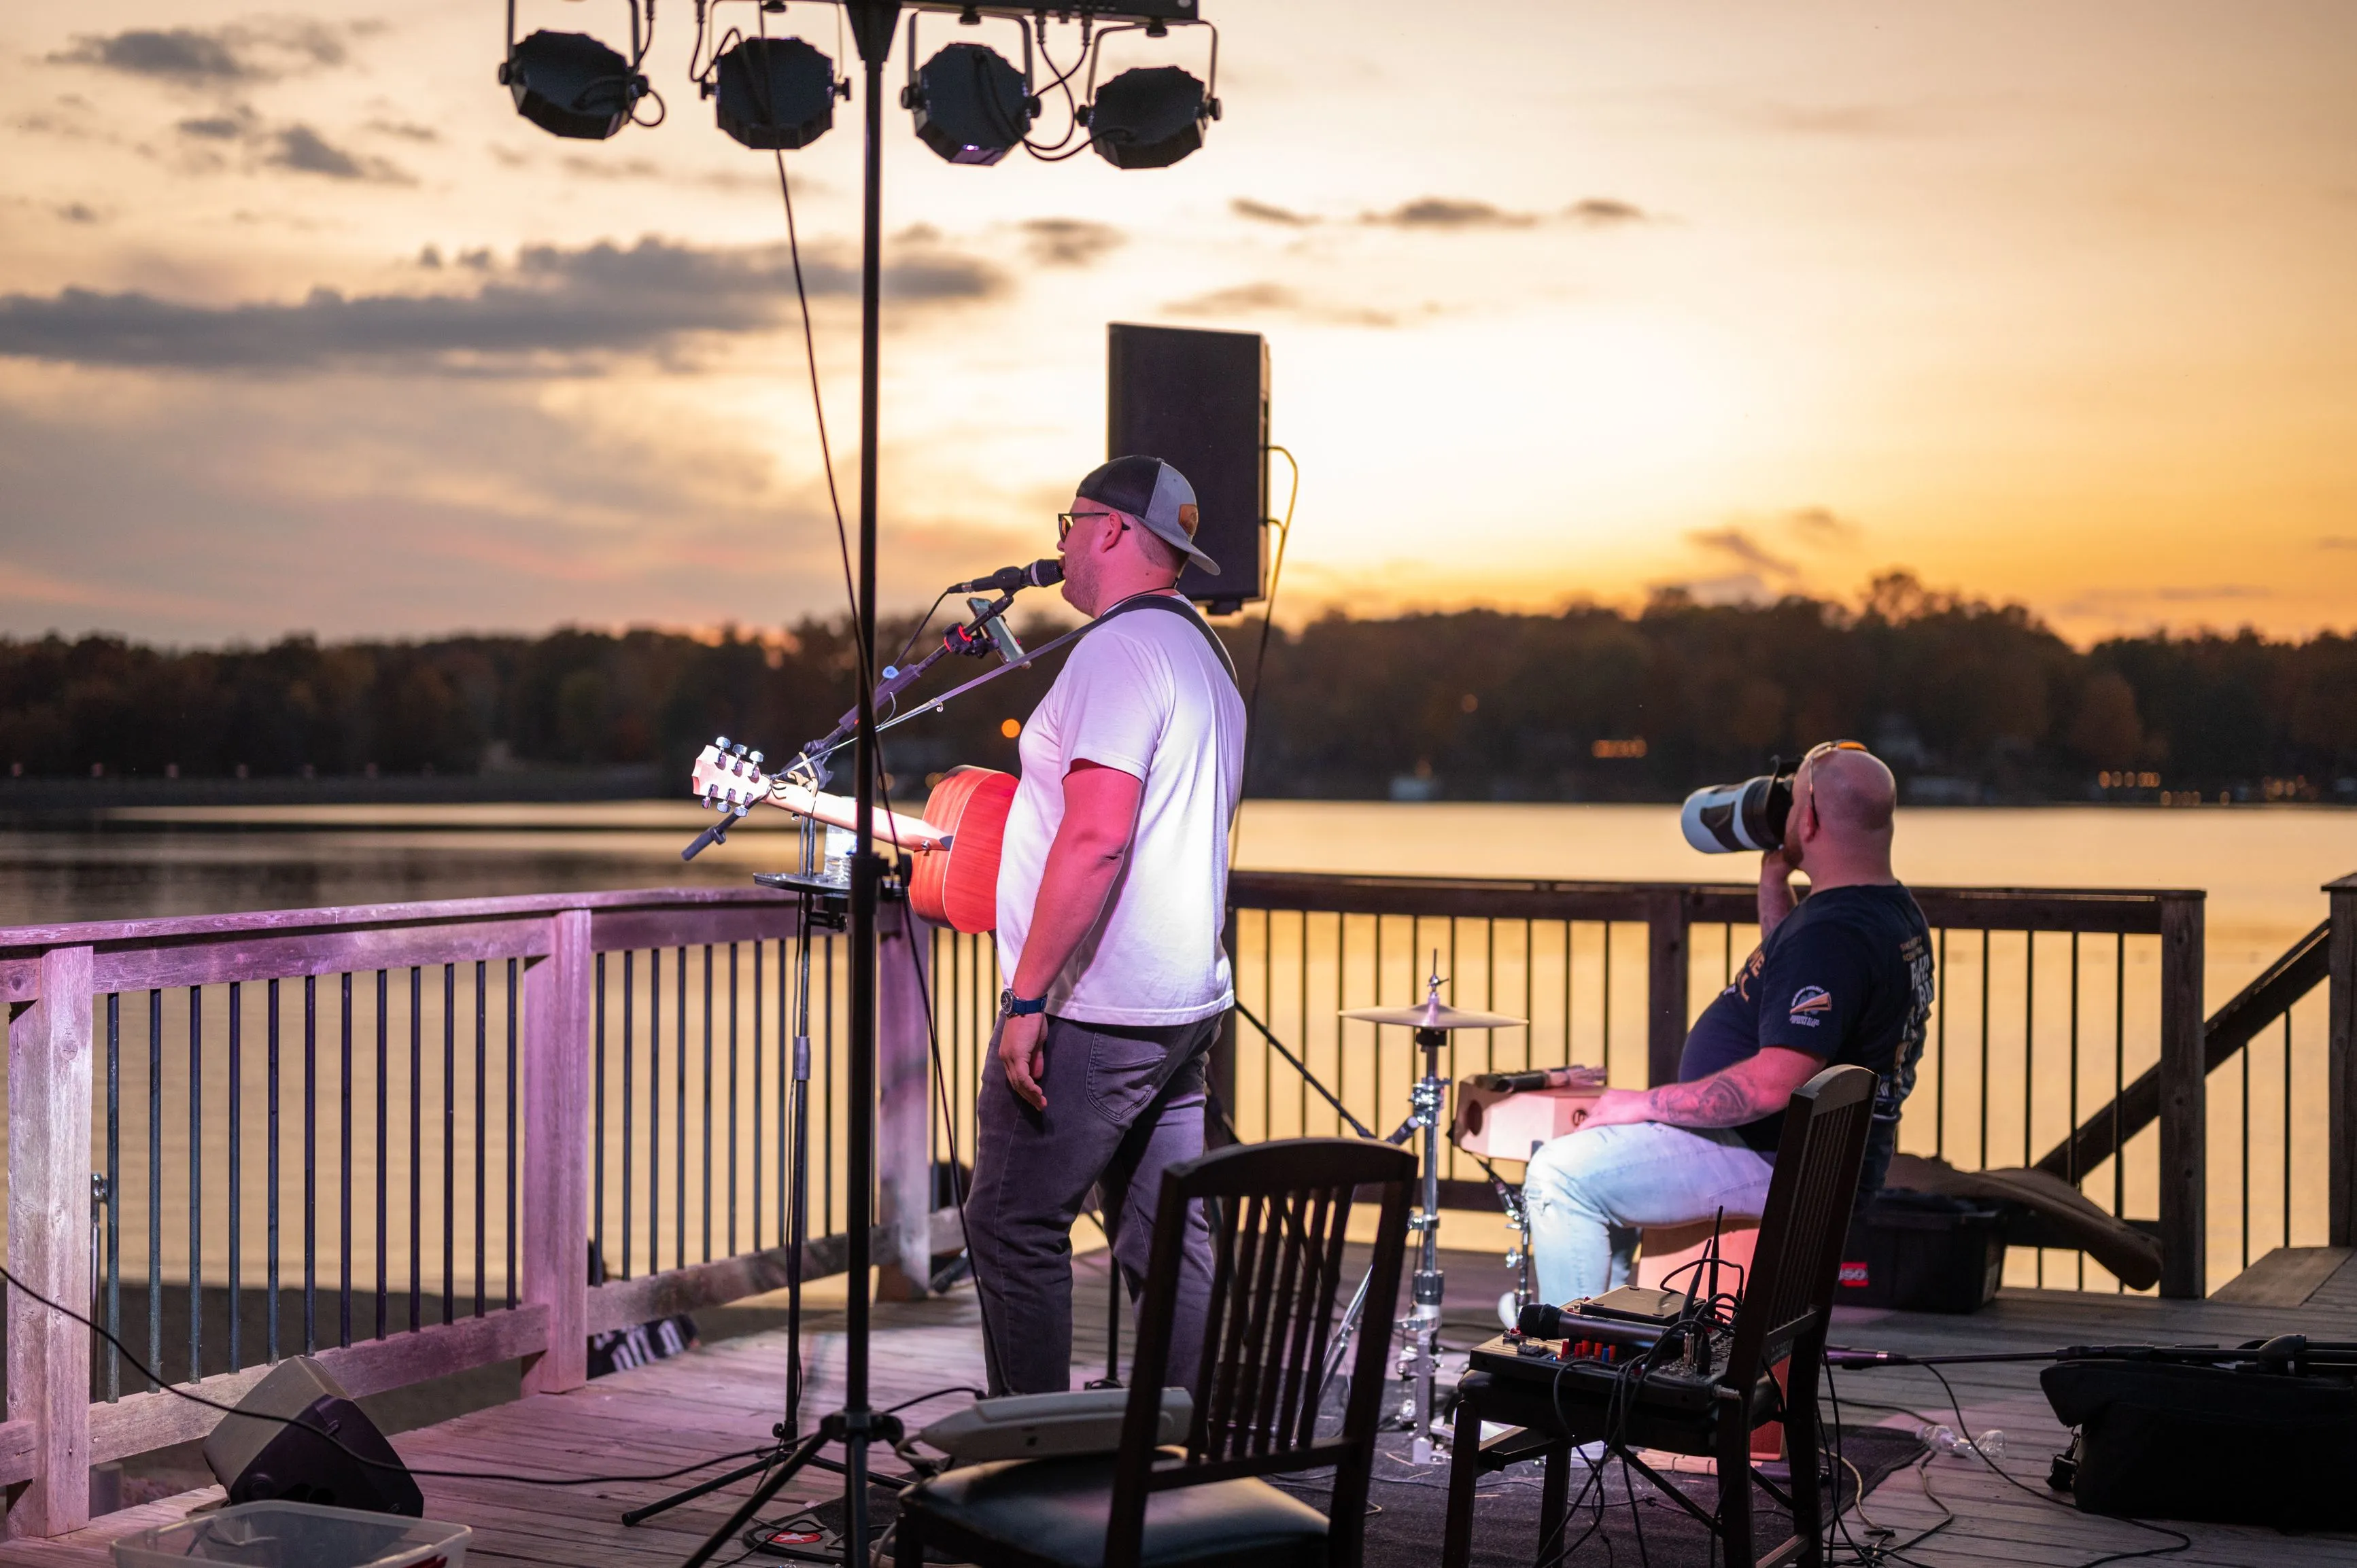 Musician playing guitar and singing into a microphone on an outdoor stage during sunset, with another person sitting by, near a body of water.